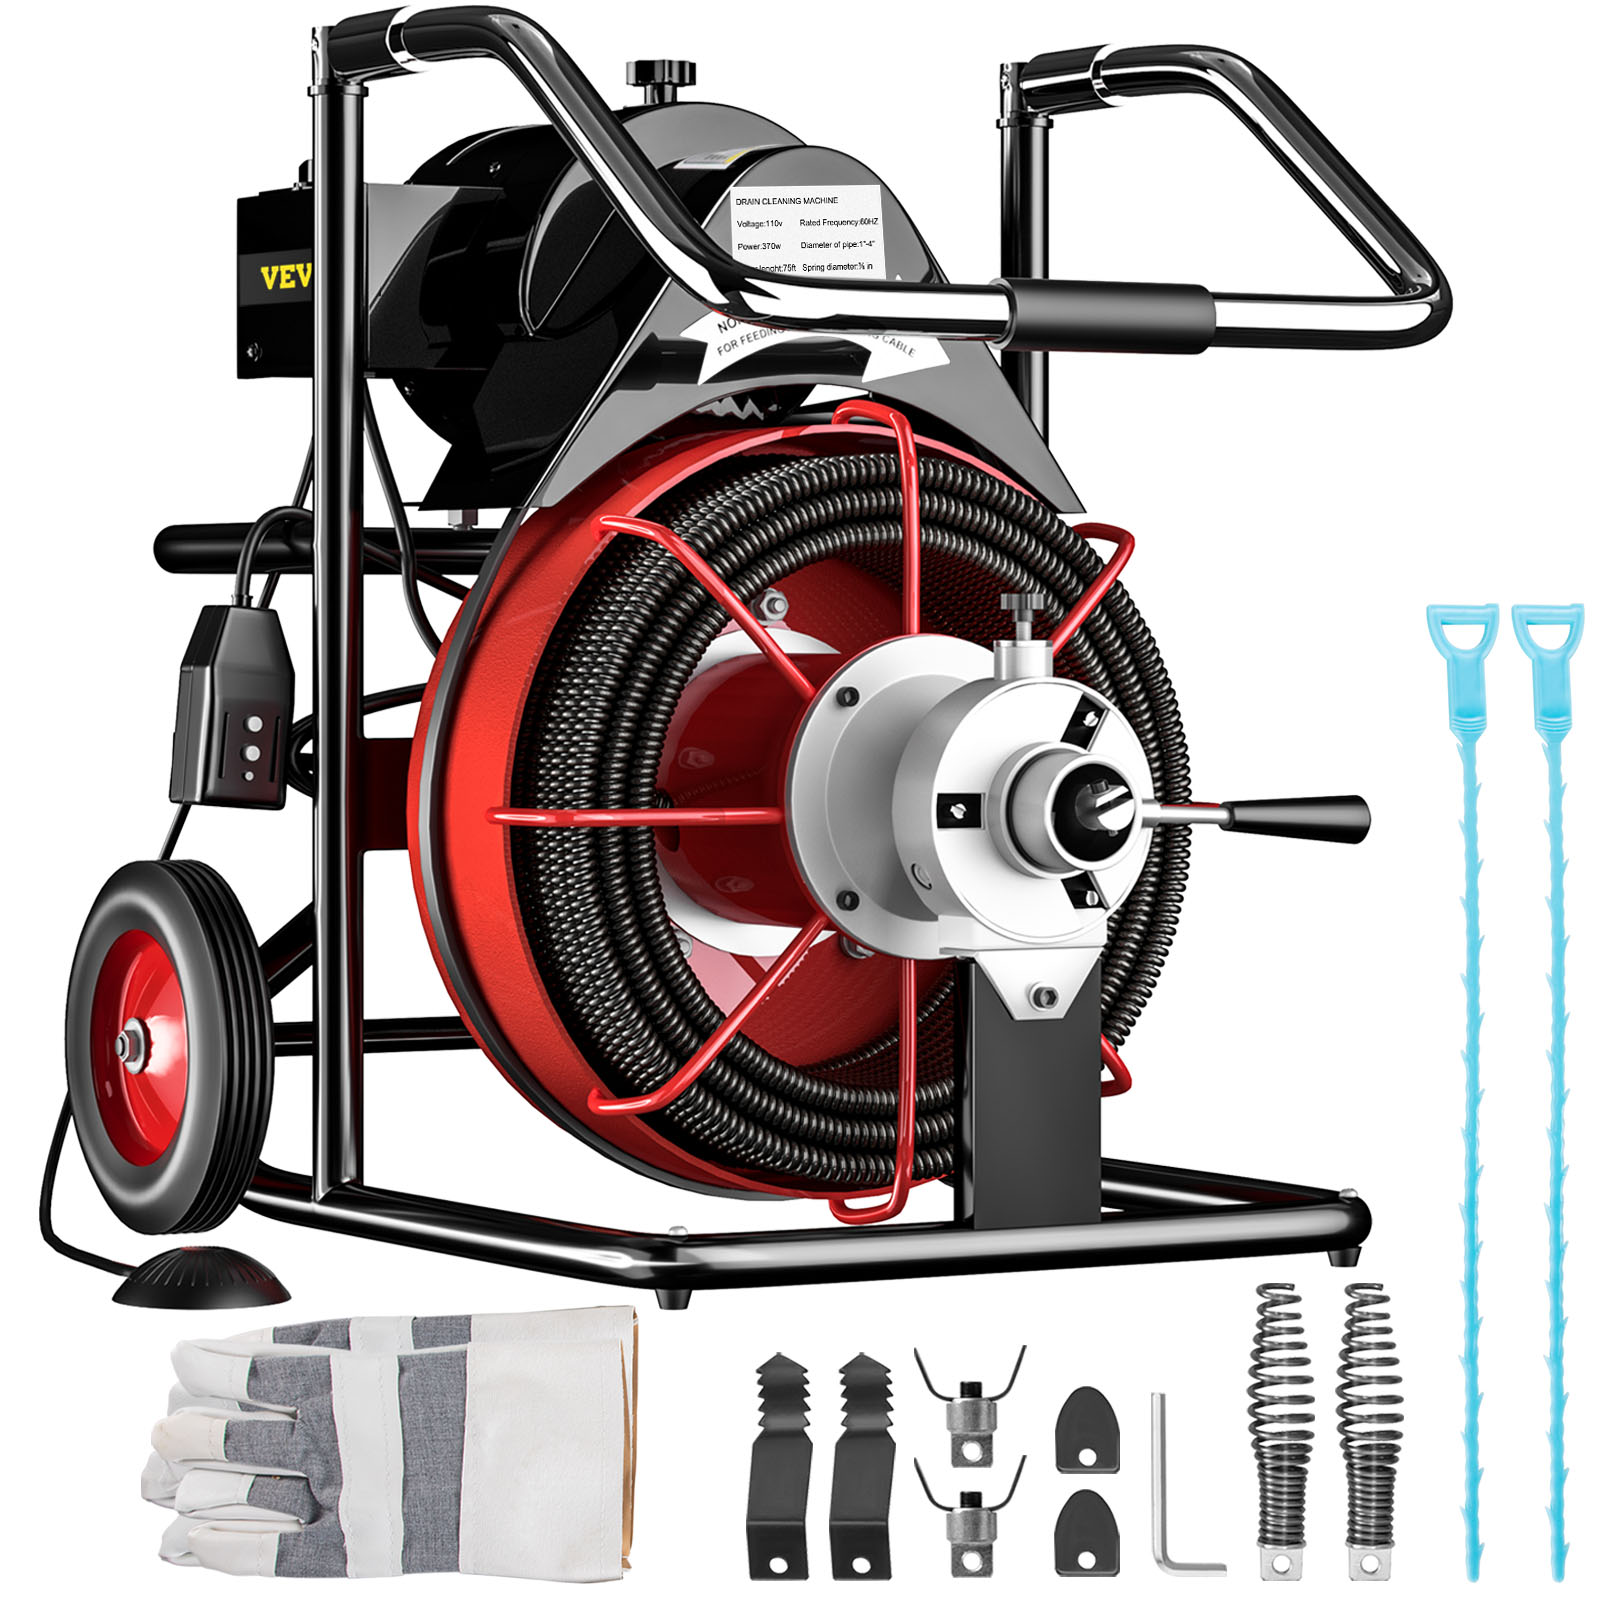 VEVOR Drain Cleaner Machine 75ft x 1/2 in, Drain Cleaning Machines 370W Drain Auger for 1 inch to 4 inch Pipes Electric Drain Snake Drill, Red